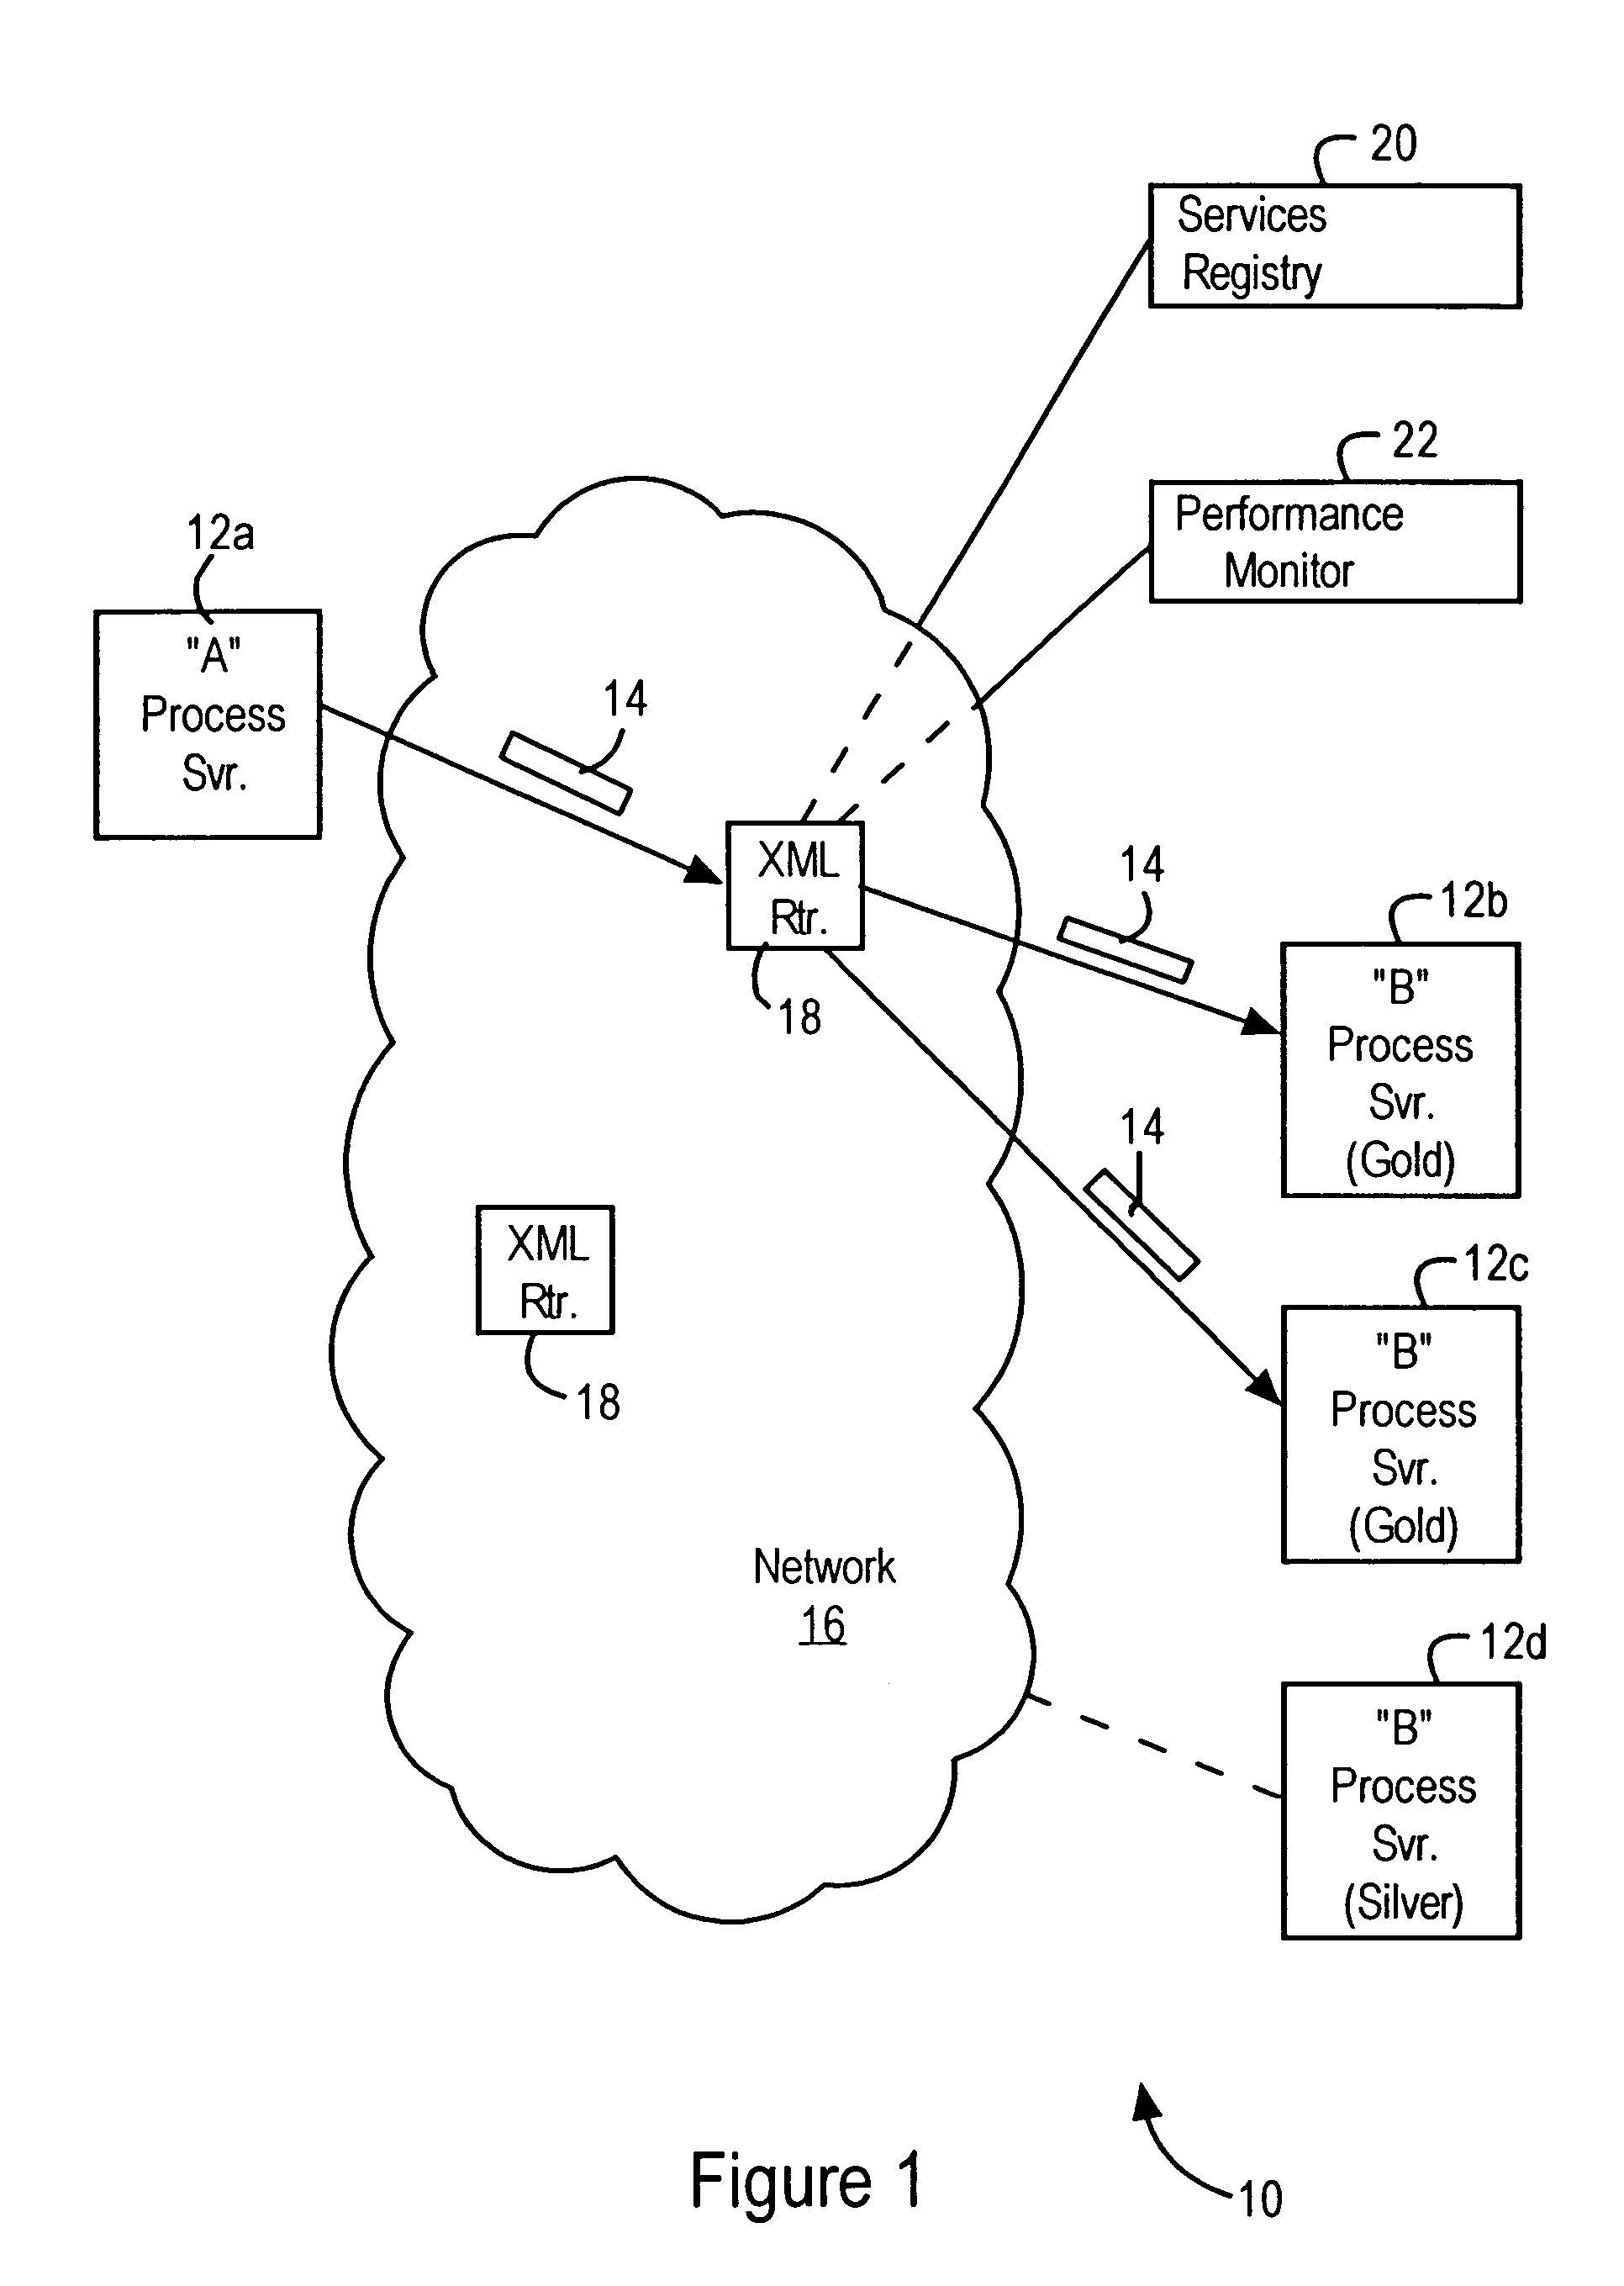 Network router configured for executing network operations based on parsing XML tags in a received XML document